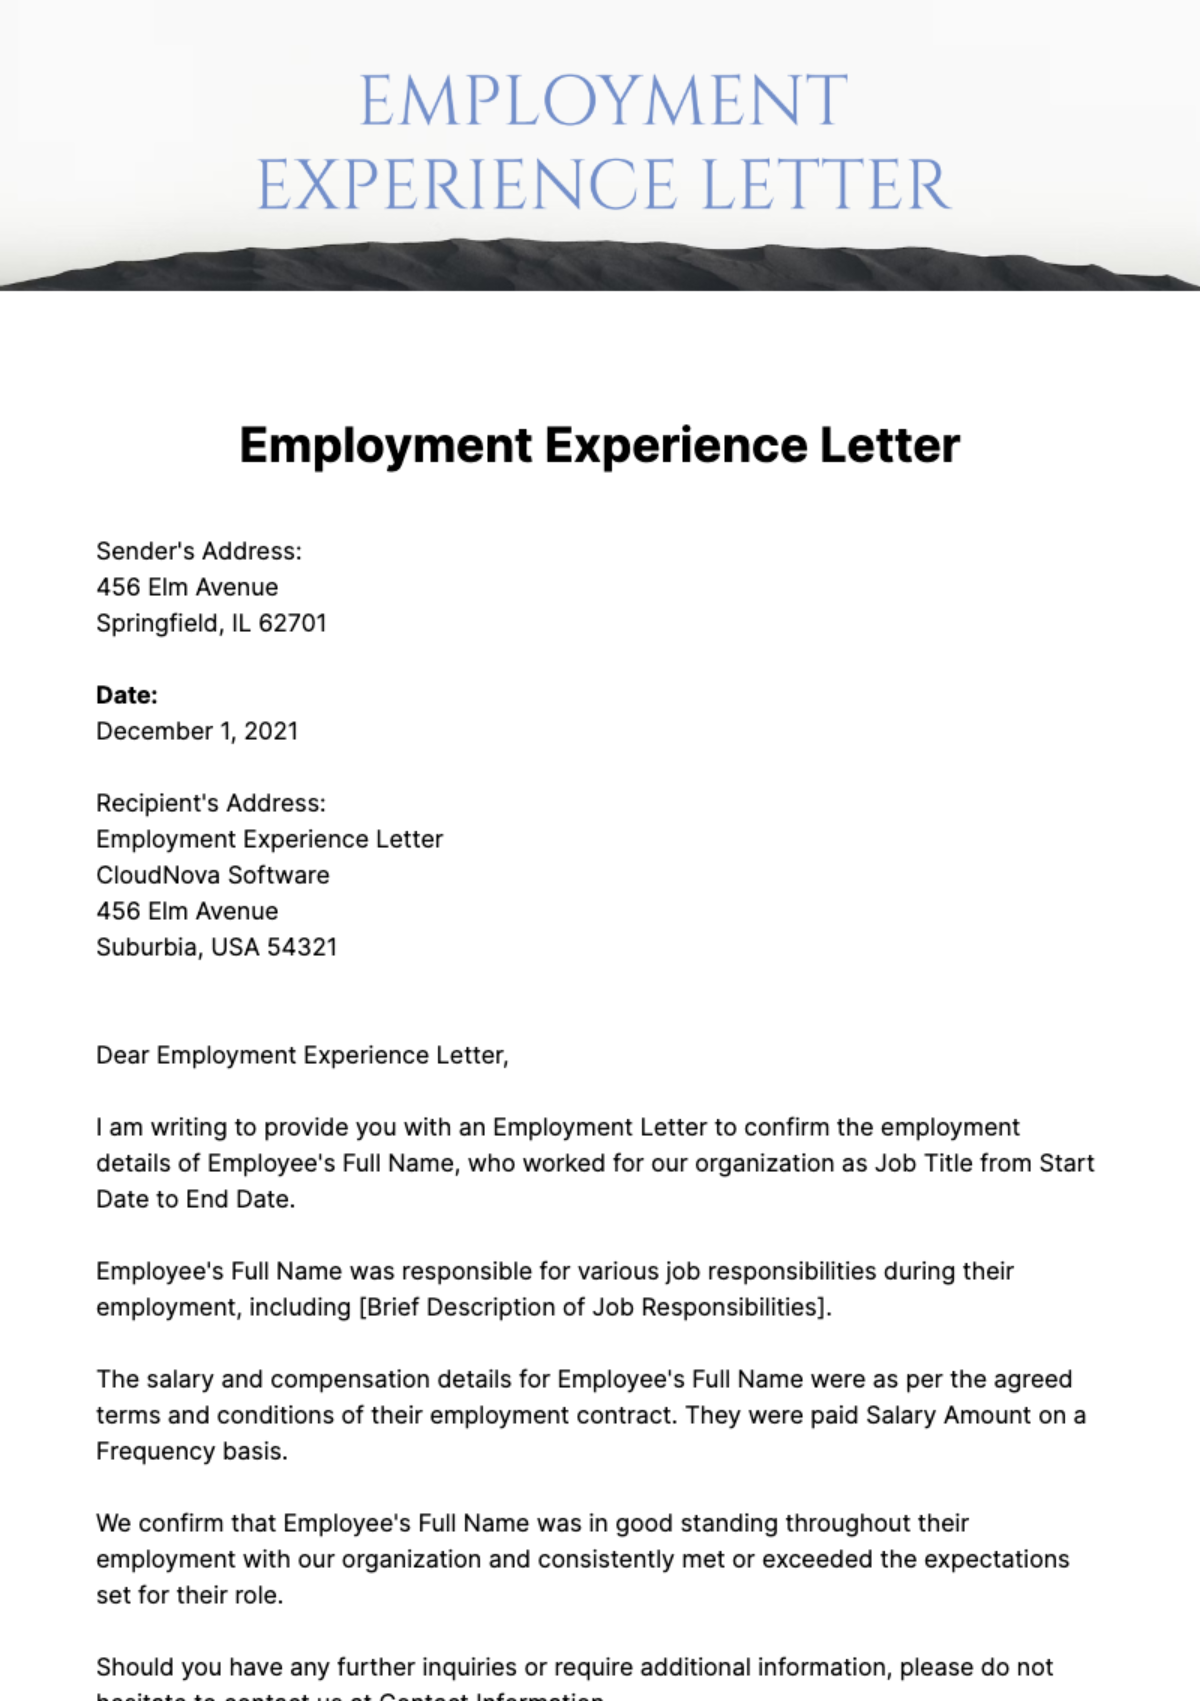 Free Employment Experience Letter Template